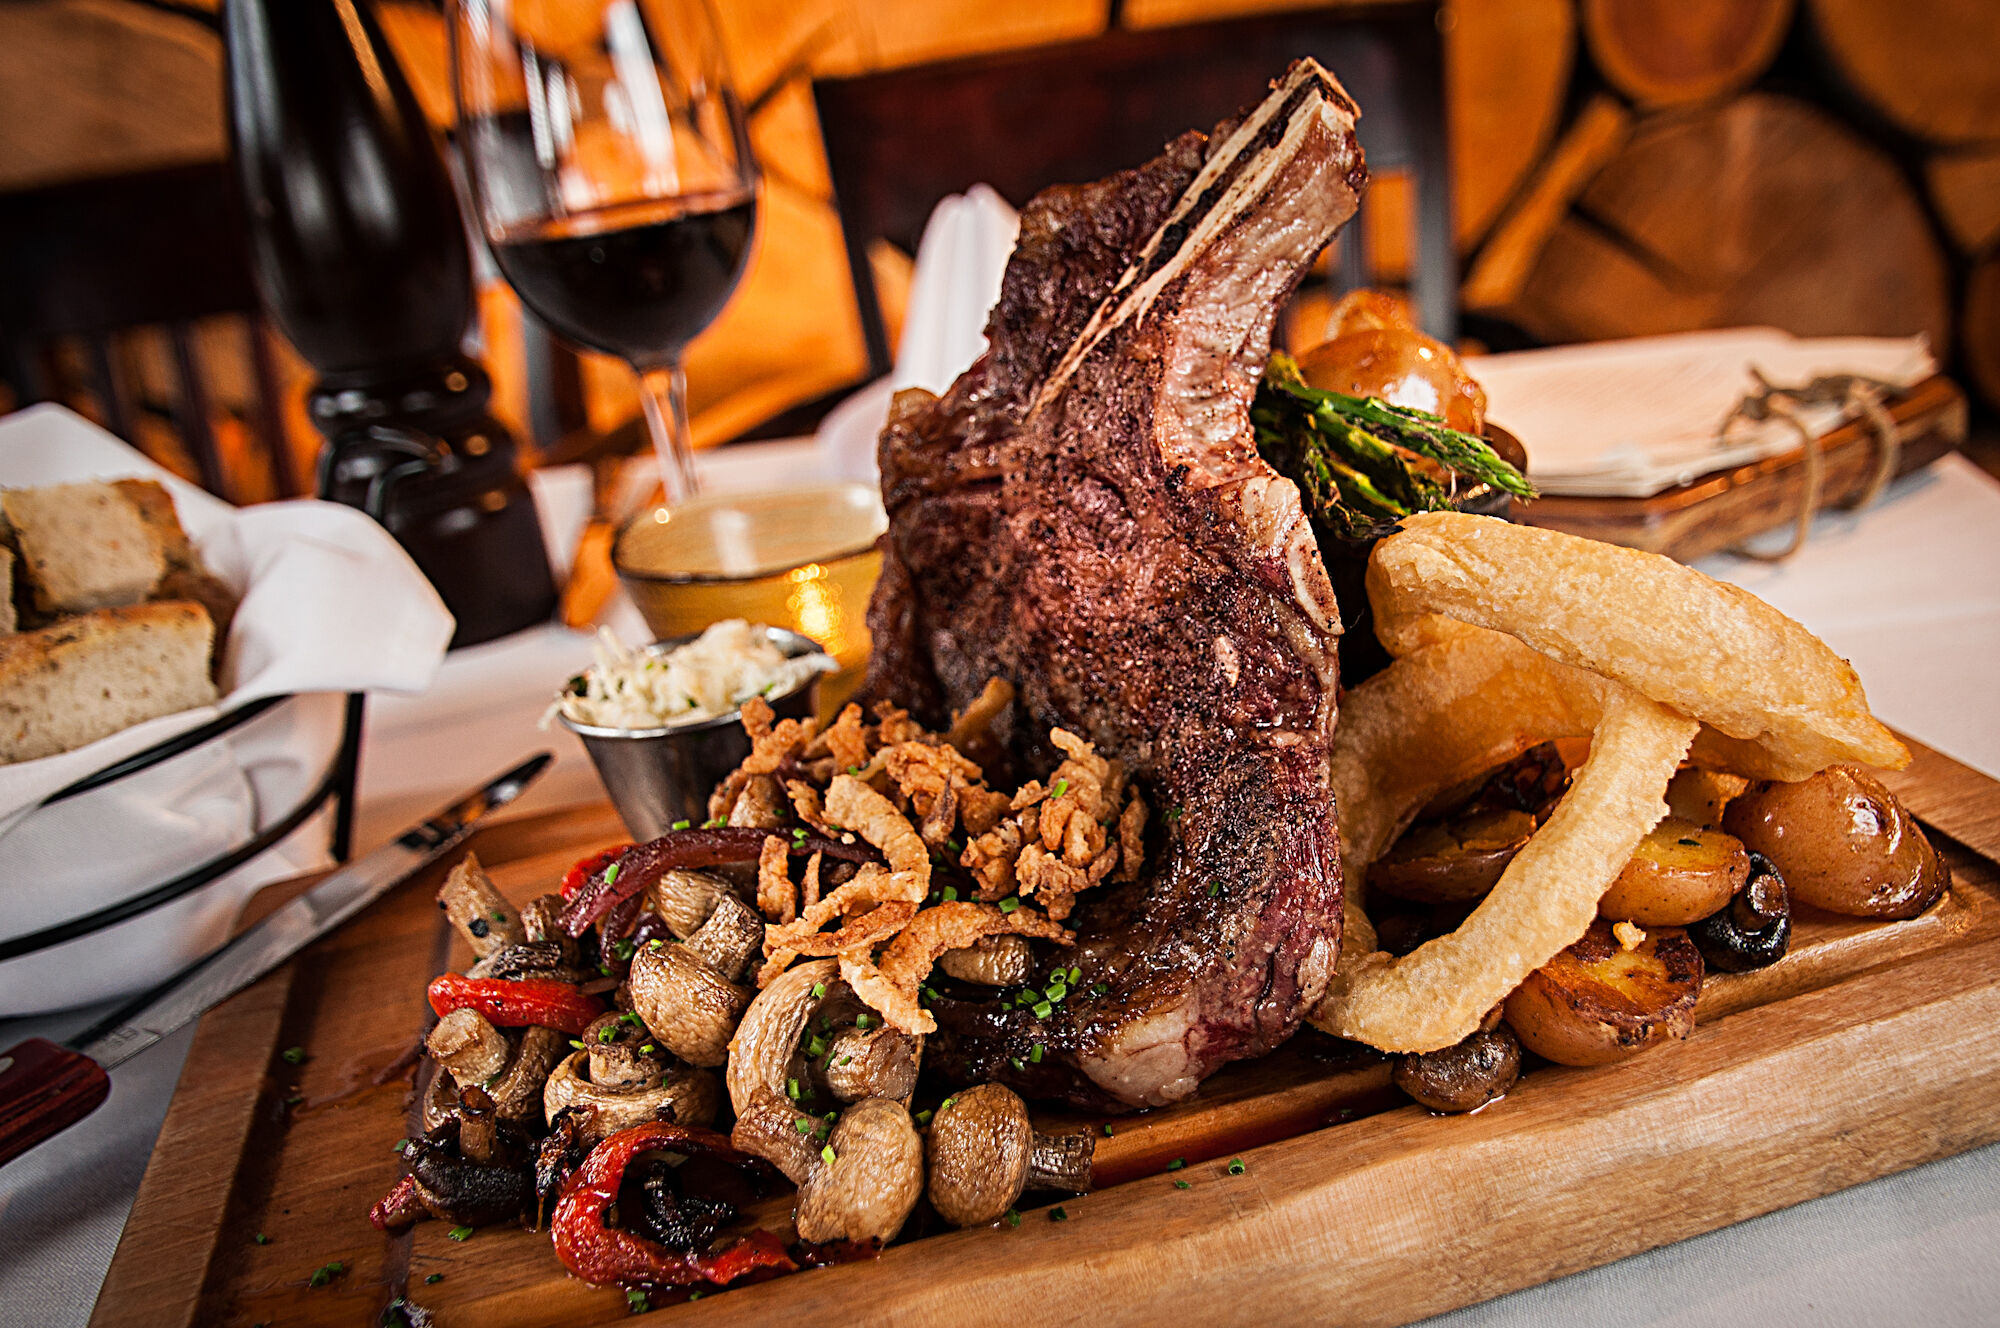 A wooden board piled high with food (ribeye steak, roasted veggies, potatoes, crispy onions) at The Maple Leaf, a restaurant in the town of Banff.